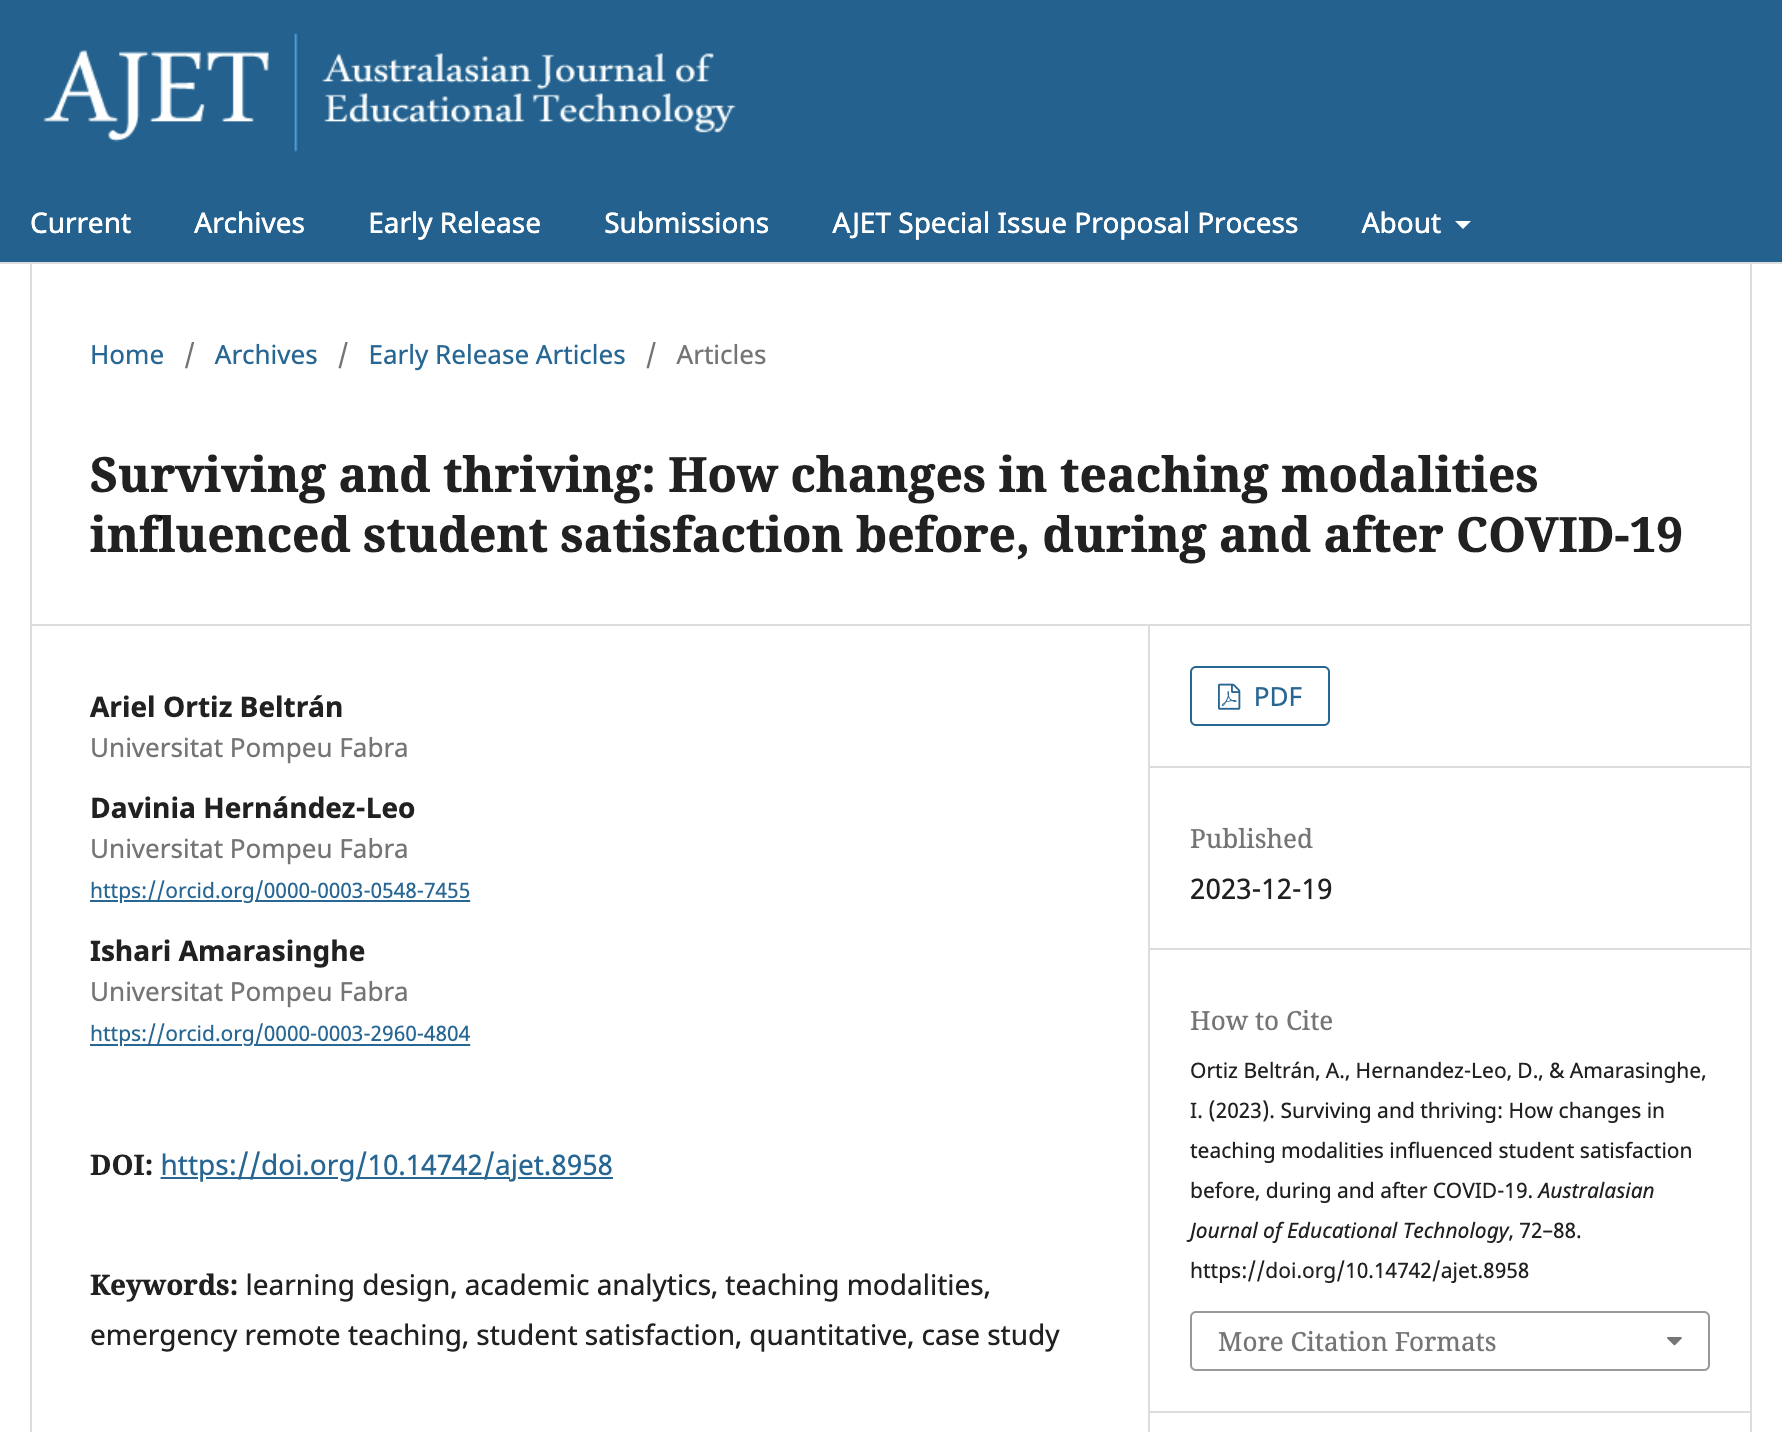 Just published! Surviving and thriving: How changes in teaching modalities influenced student satisfaction before, during and after COVID-19